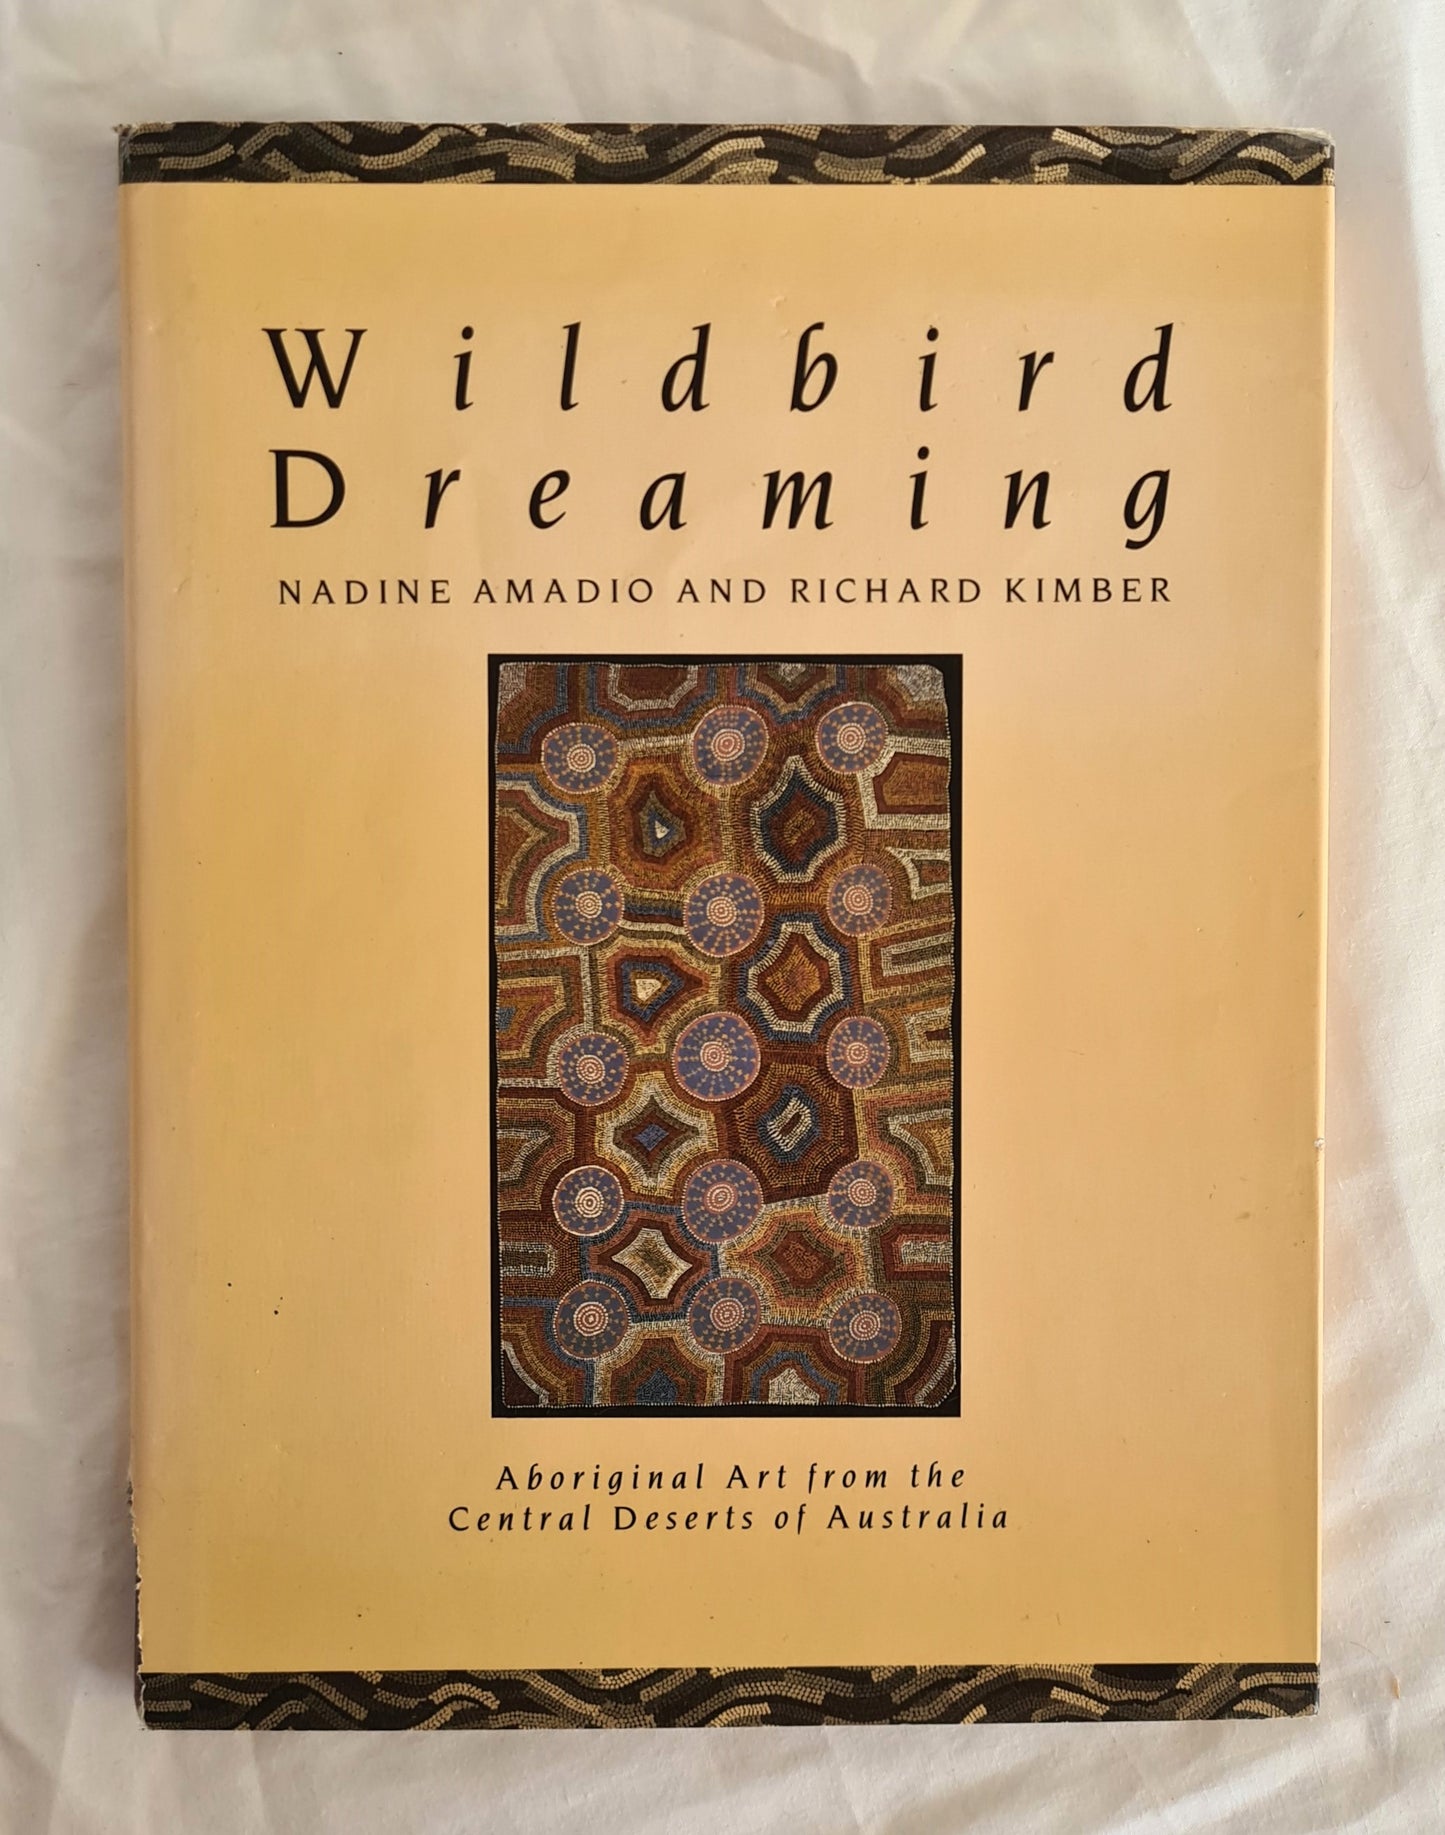 Wildbird Dreaming  Aboriginal Art from the Central Deserts of Australia  by Nadine Amadio and Richard Kimber  photography by Barry Skipsey